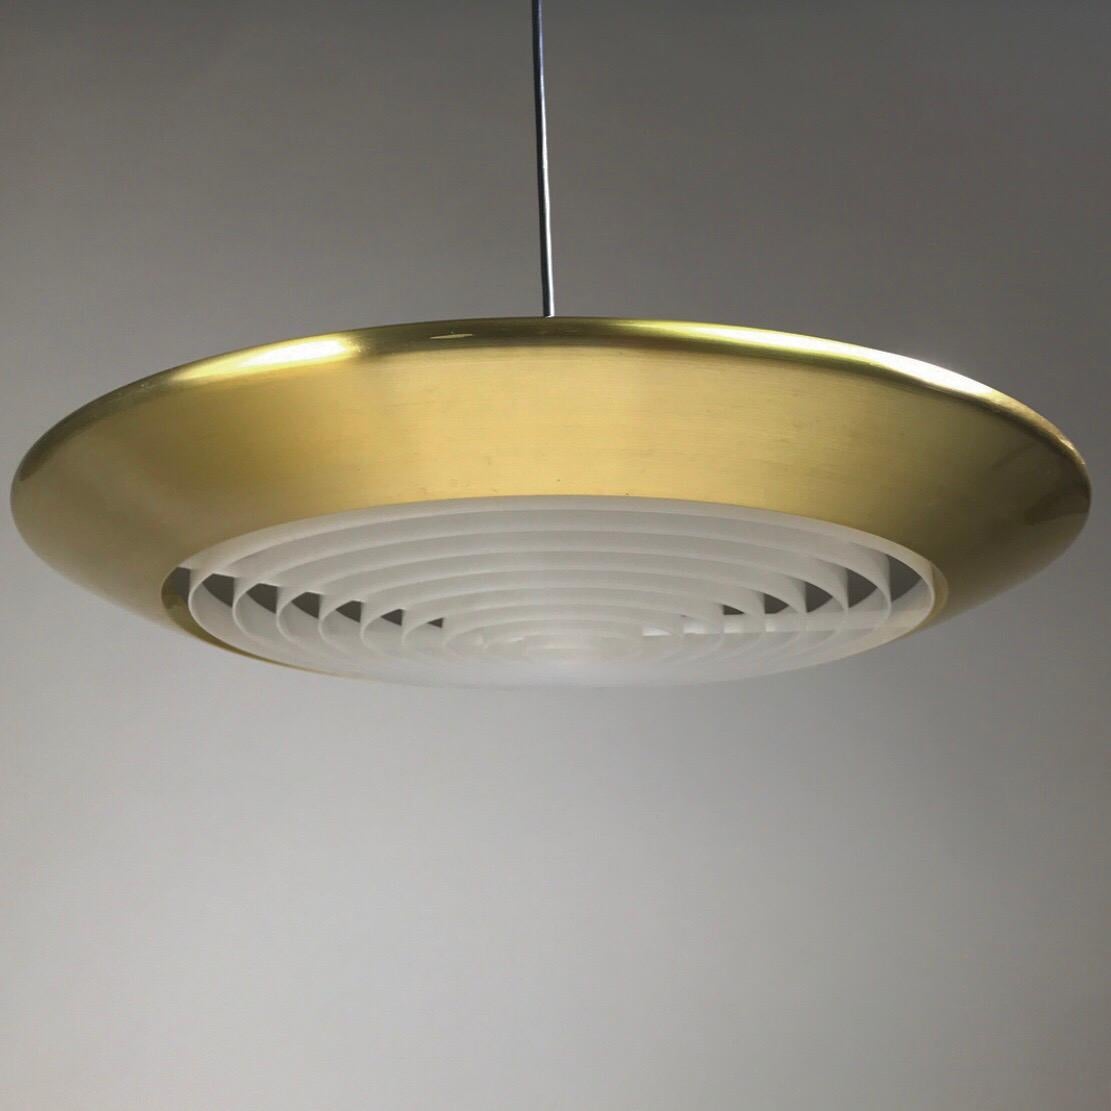 Amazing brass DisKos by Danish Fog & Mørup designed by Jo Hammerborg.

Jo Hammerborg’s own lighting designs for Fog & Mørup won numerous prizes, amongst them a CICi first prize in 1965 for the Nova and four iF Product Design Awards in 1969 for the